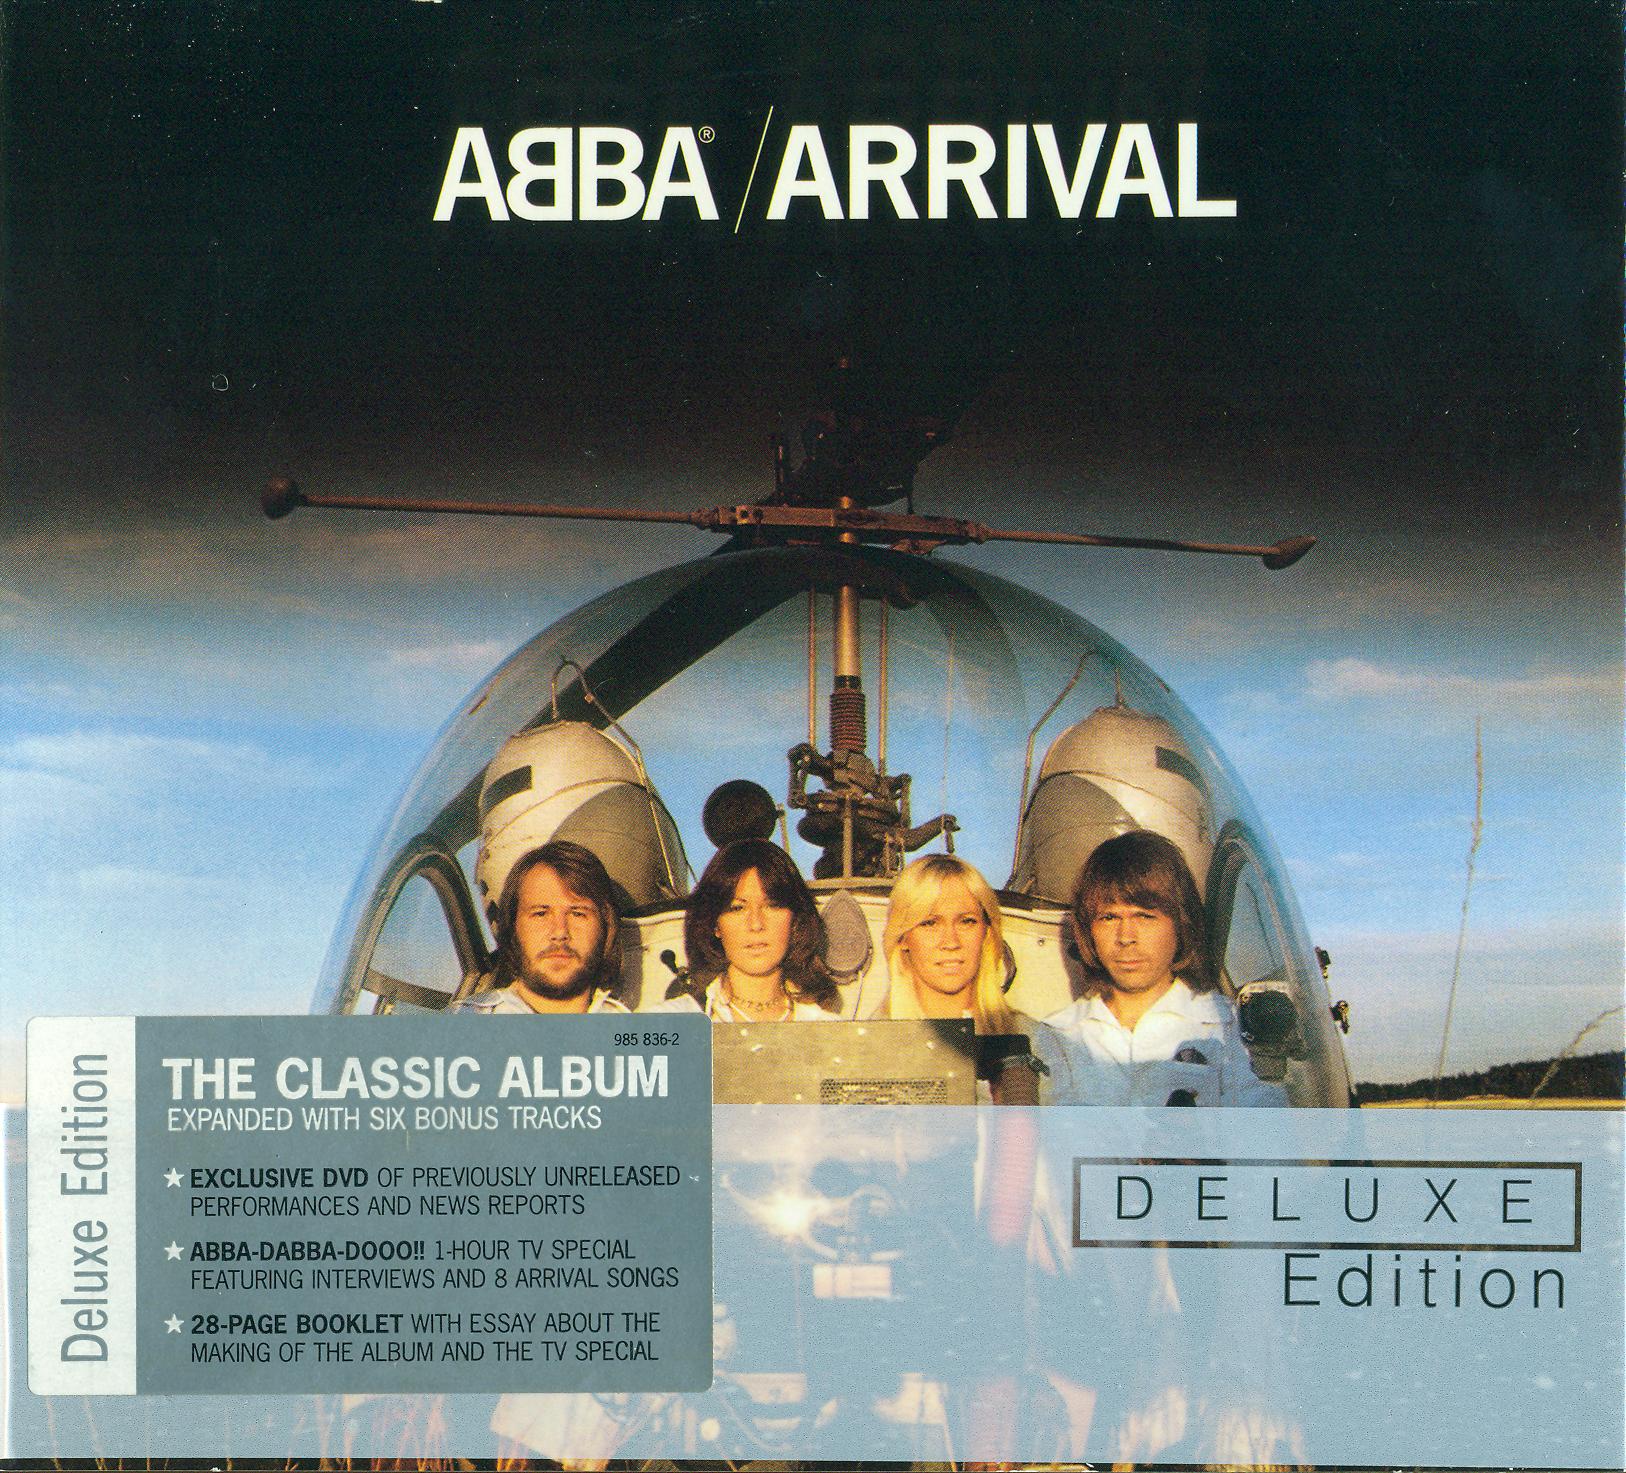 abba complete discography torrent download